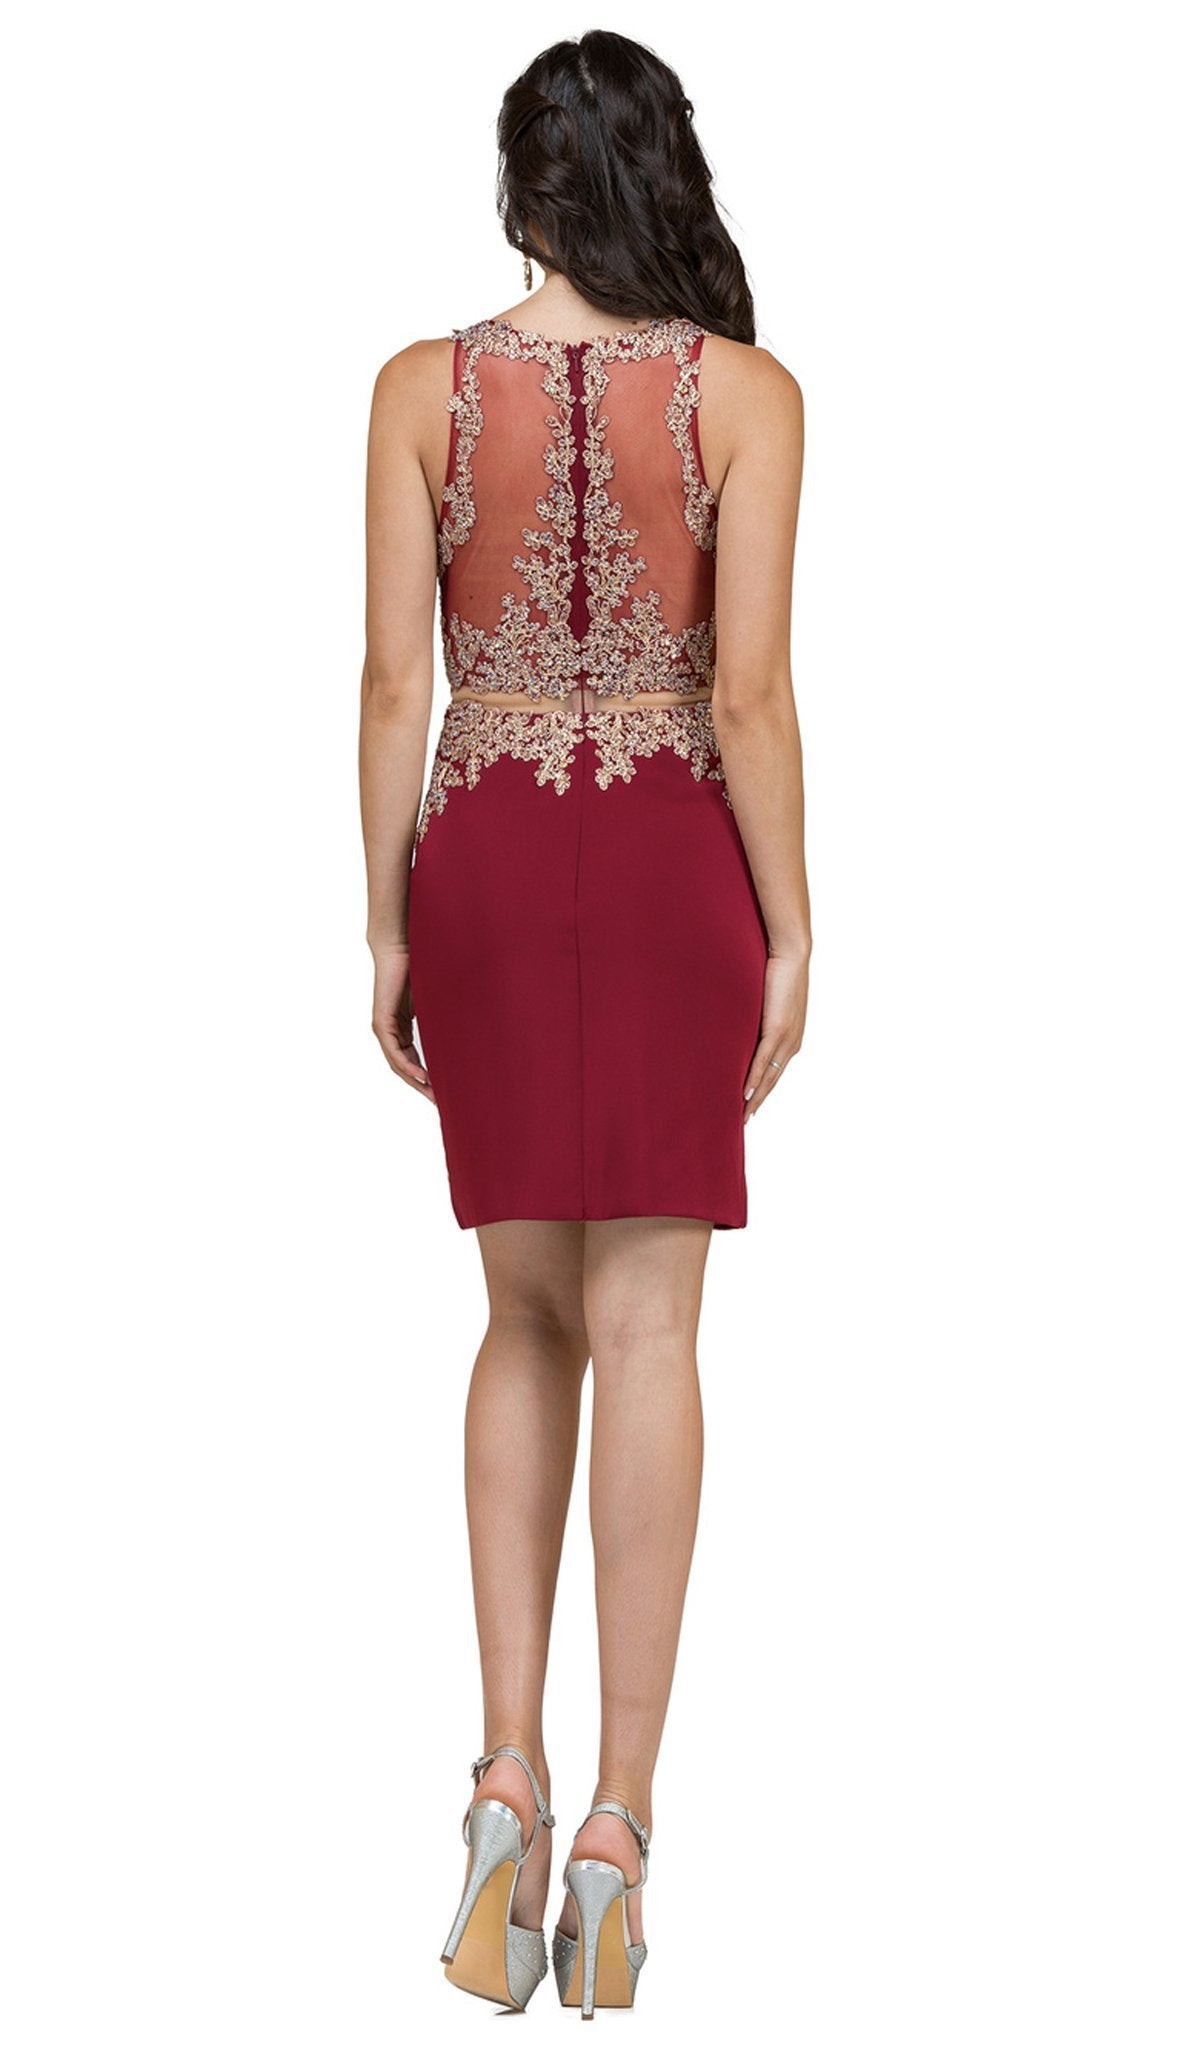 Dancing Queen - 2000 Mock Two-Piece Illusion Lace Cocktail Dress In Red